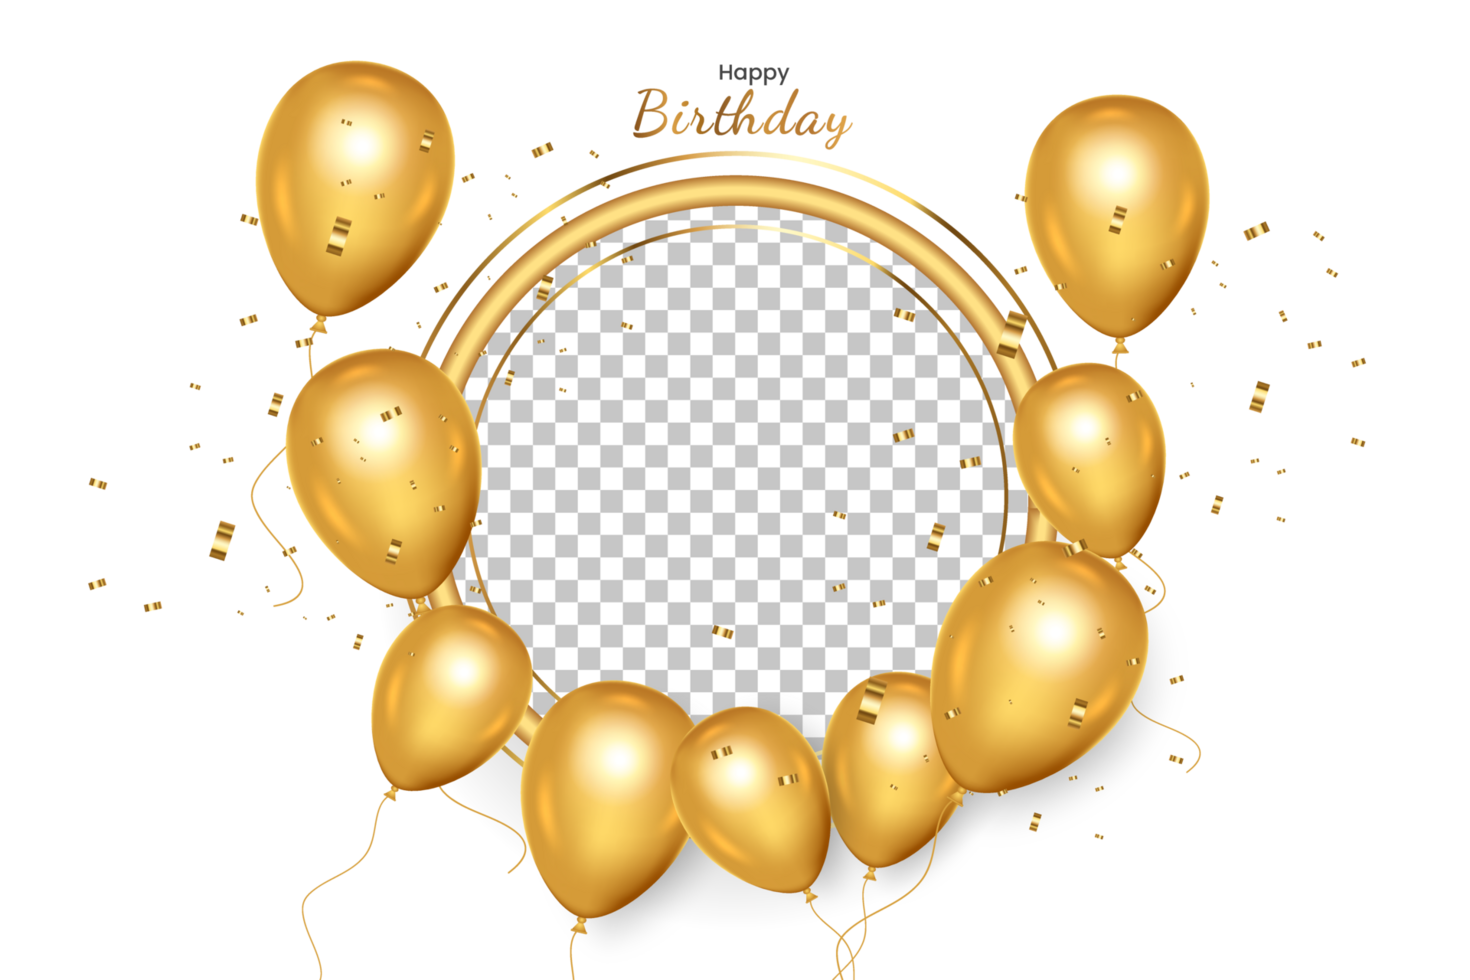 happy birthday   design. happy birthday to you text with elegant gold balloons. png